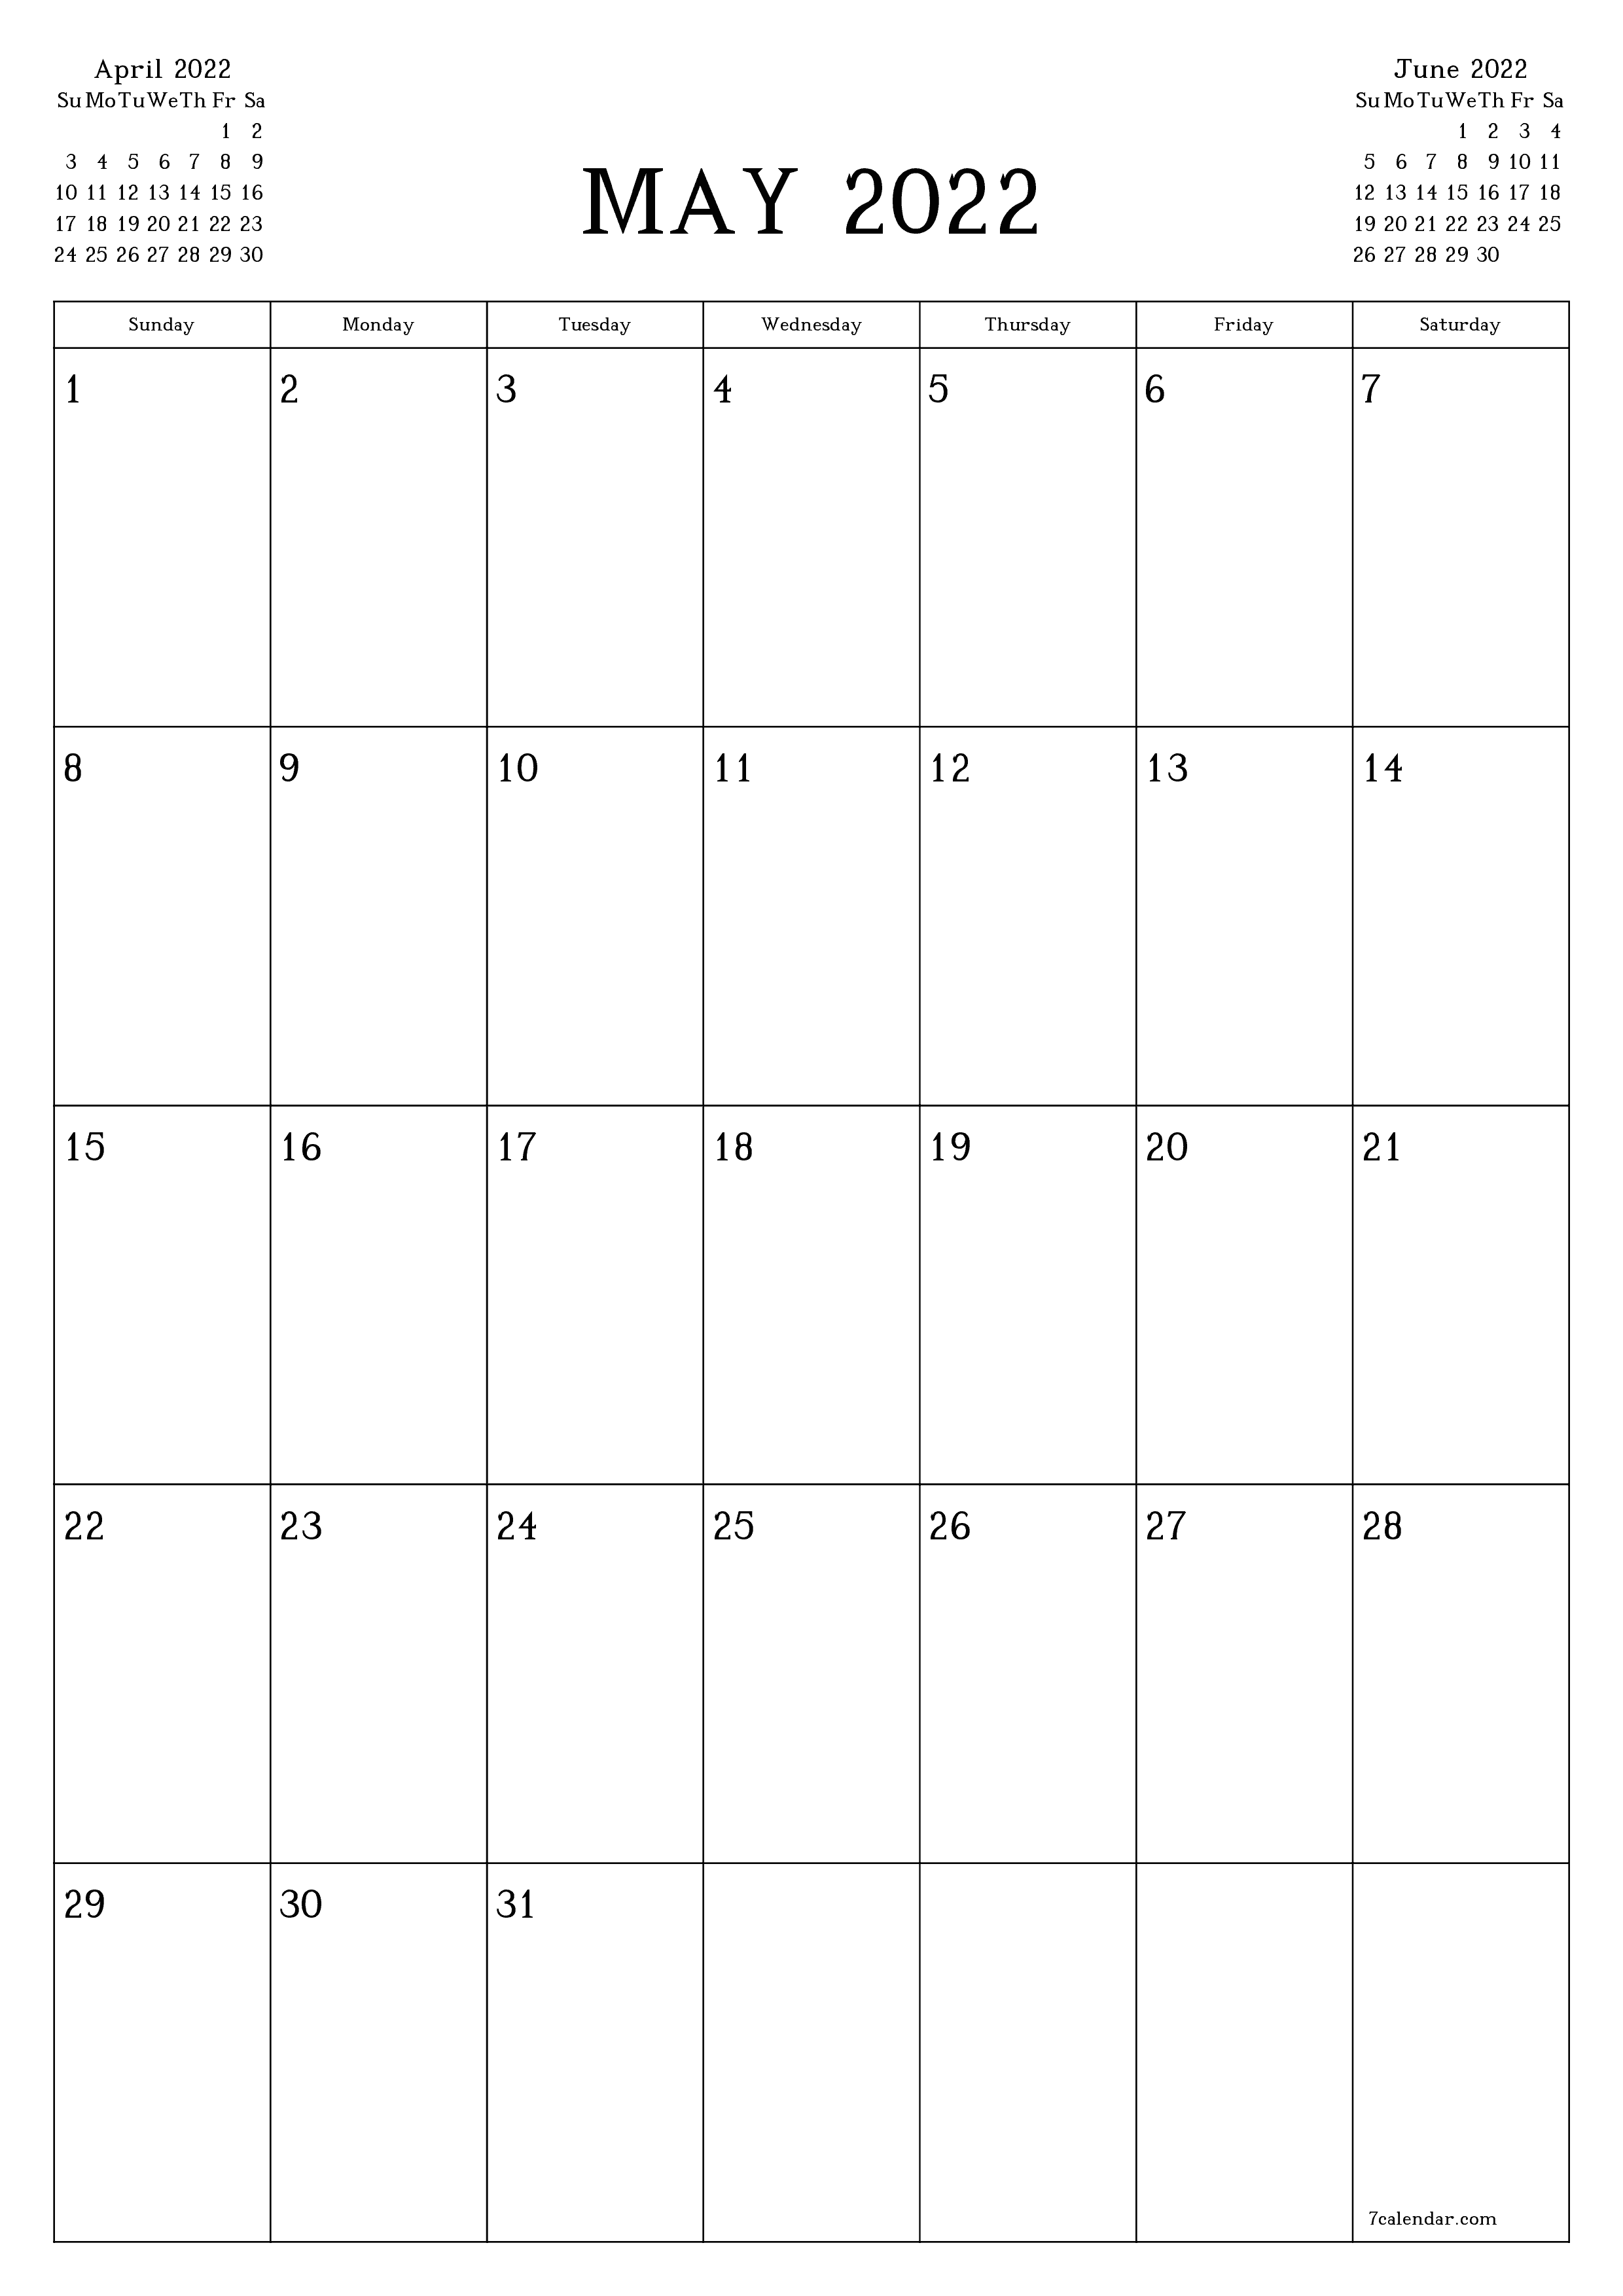 Blank monthly calendar planner for month May 2022 with notes save and print to PDF PNG English - 7calendar.com